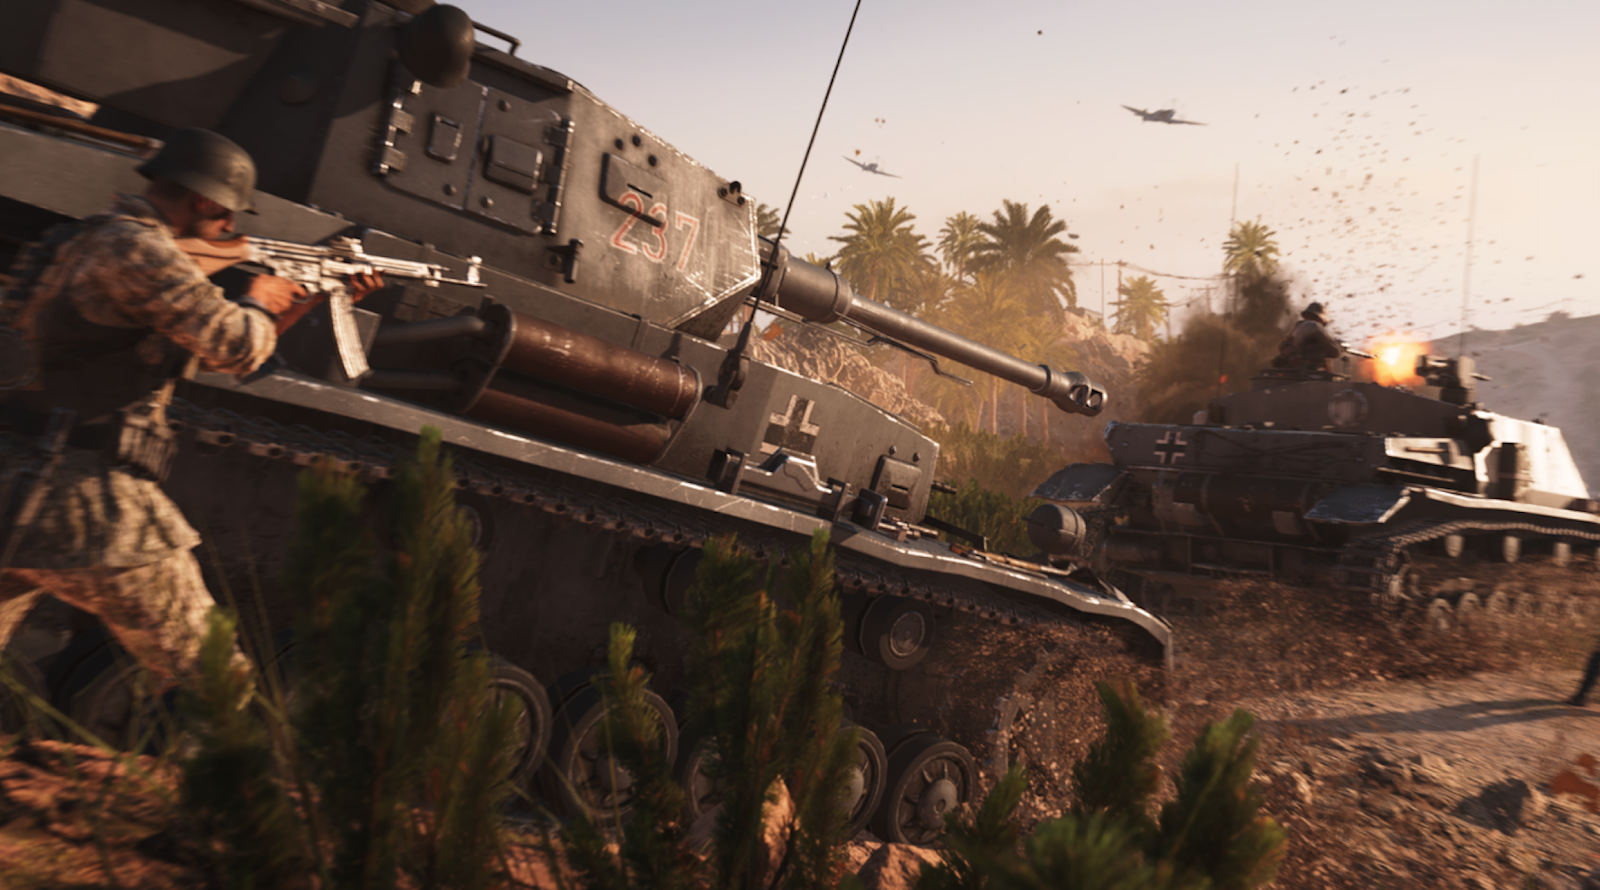 Battlefield 5 Developers Cancel 5v5 Mode, Saying They Need To Fix Other Bugs